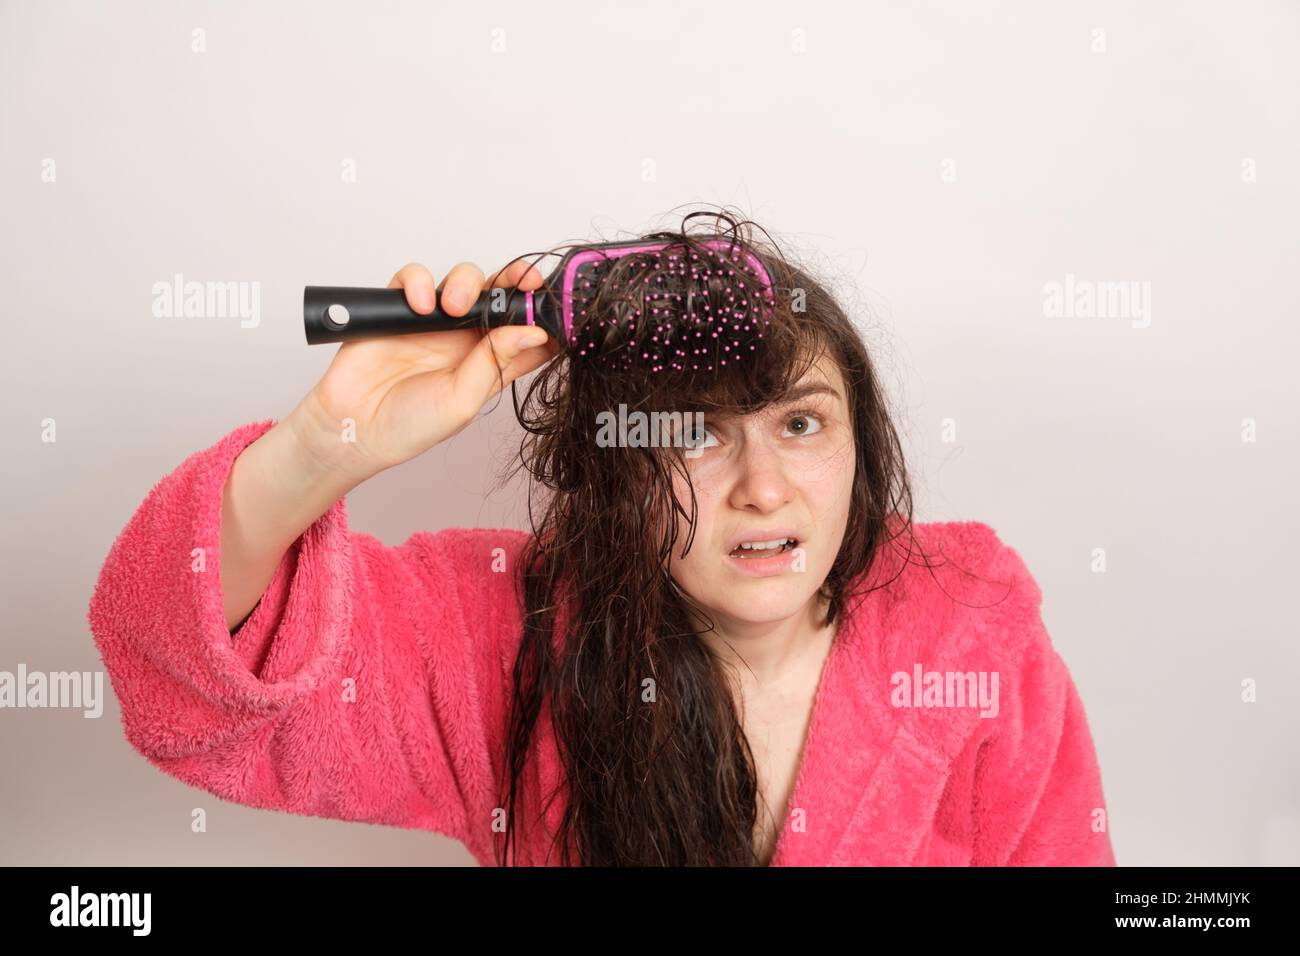 A woman tries to comb her tangled wet hair. Hair care at home, hair loss and section. Stock Photo